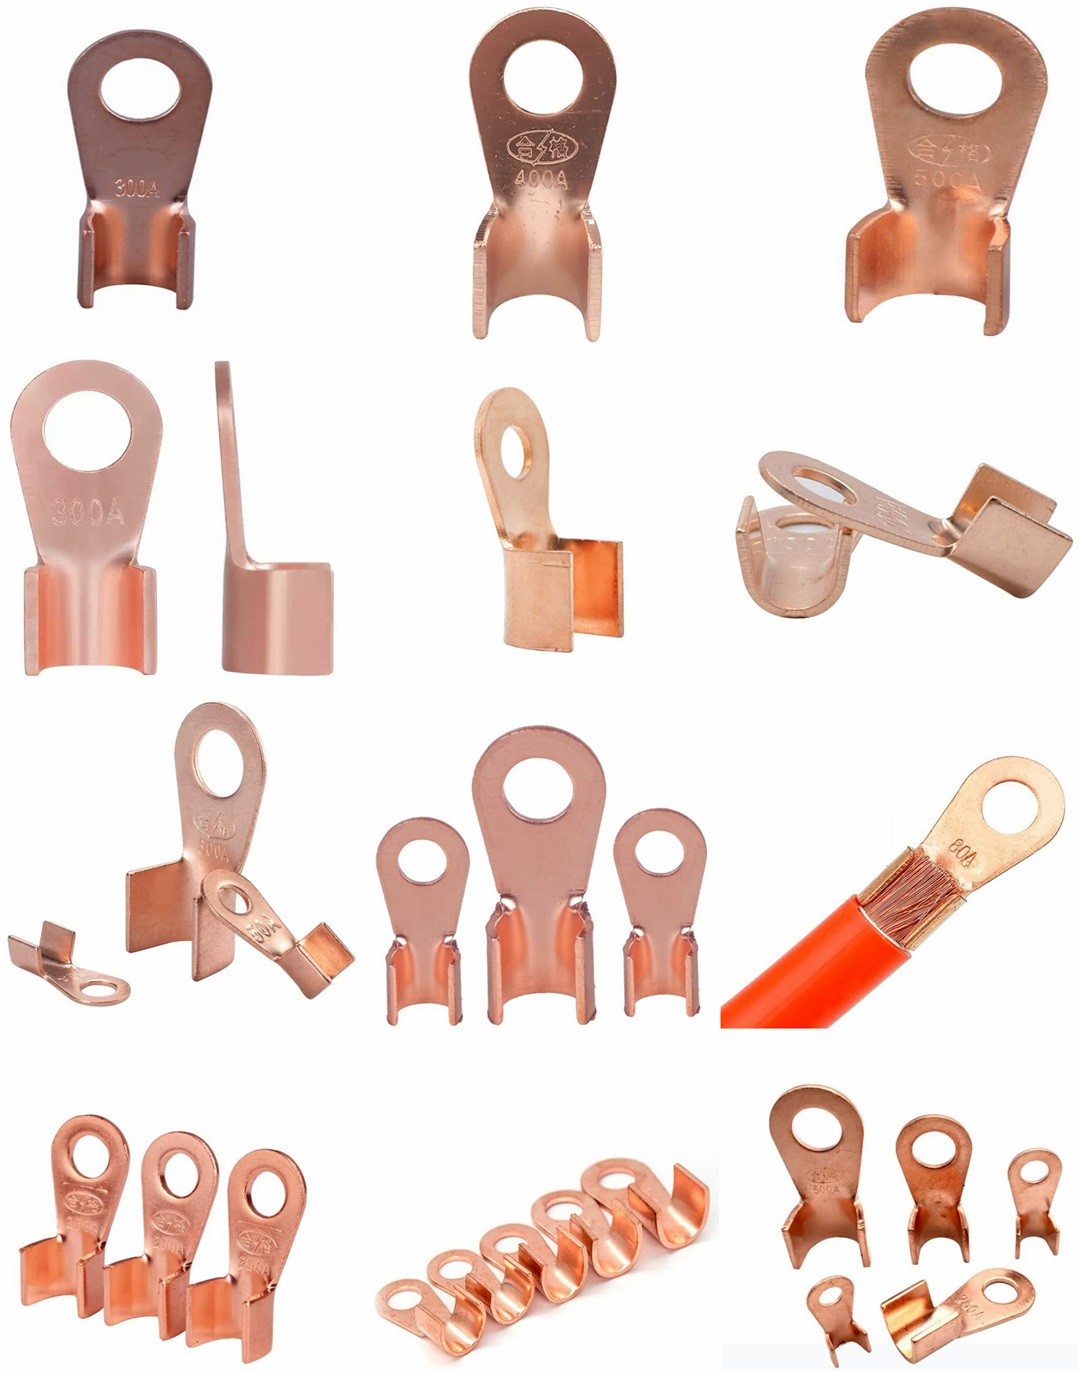 copper passing through terminal cable lugs